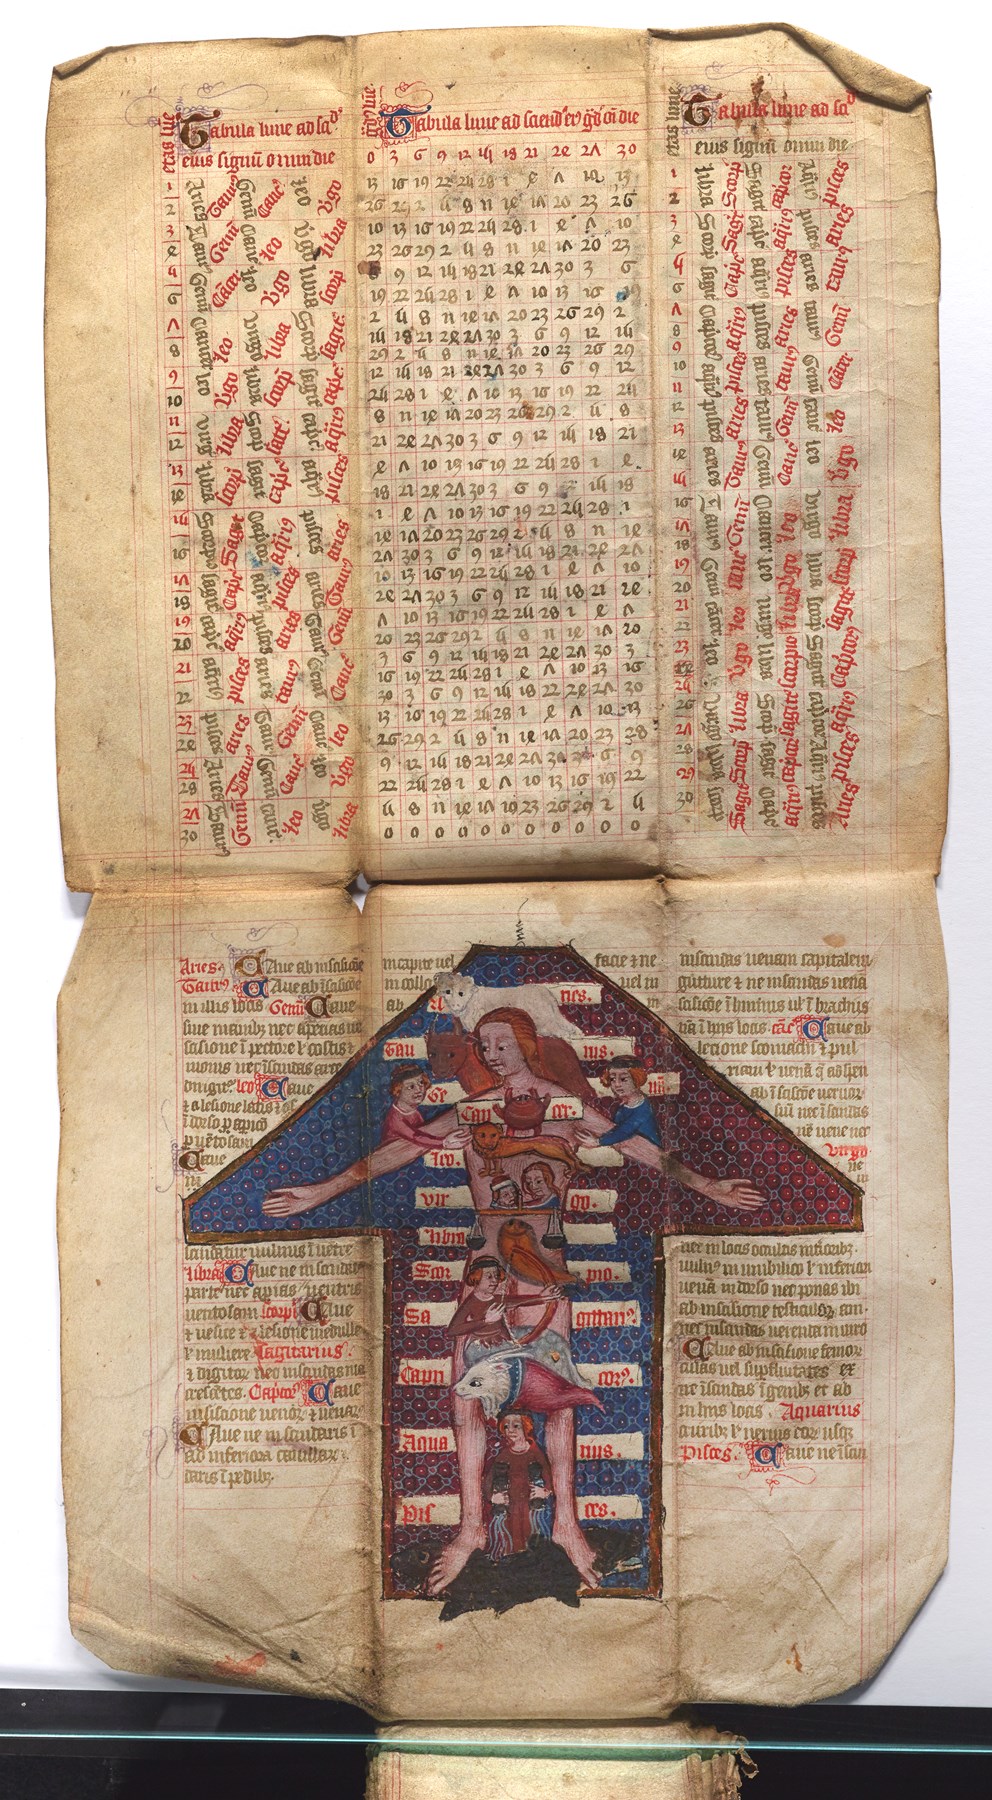 A 15th-century folded almanac which probably belonged to a doctor based in northern England. When it was folded up, it could be worn on the belt. The image illustrates the connections believed to exist between the signs of the zodiac and certain parts of the human body.